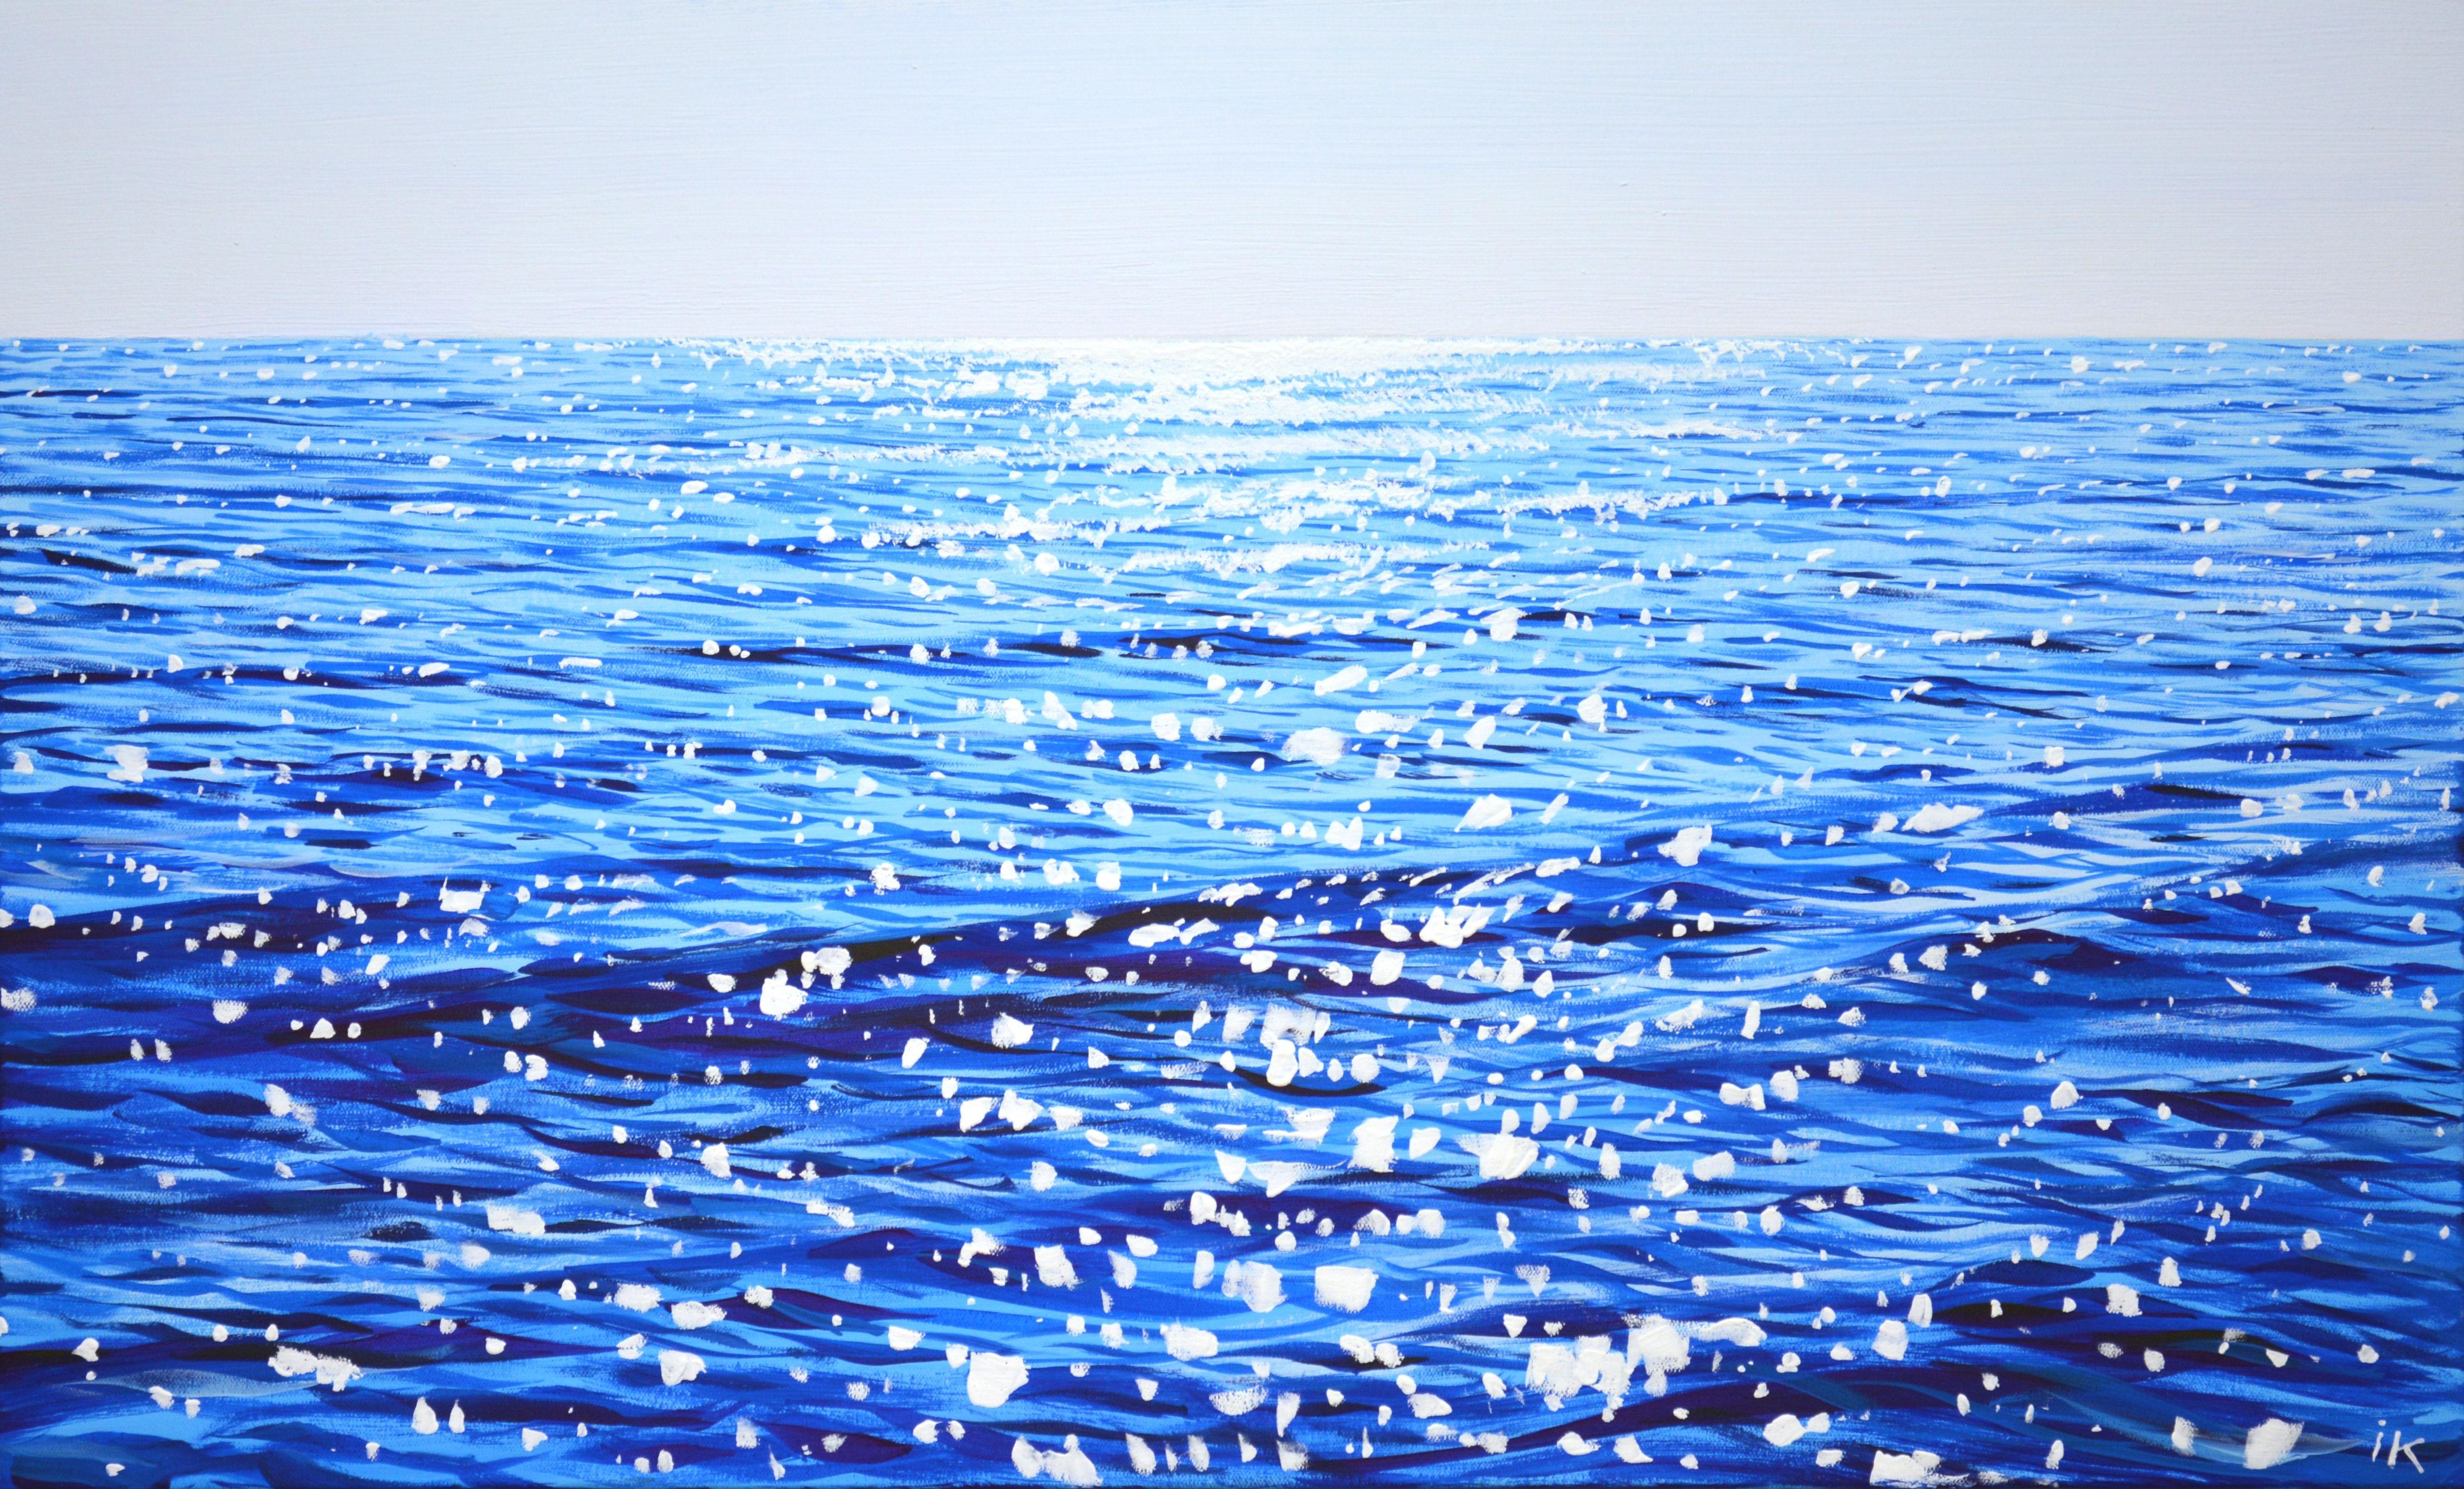 Tender sea. Blue water, clear skies, waves, serene views, sun glare on the water create an atmosphere of relaxation and romance. Made in the style of realism, the blue, white palette emphasizes the energy of water. Part of a permanent series of